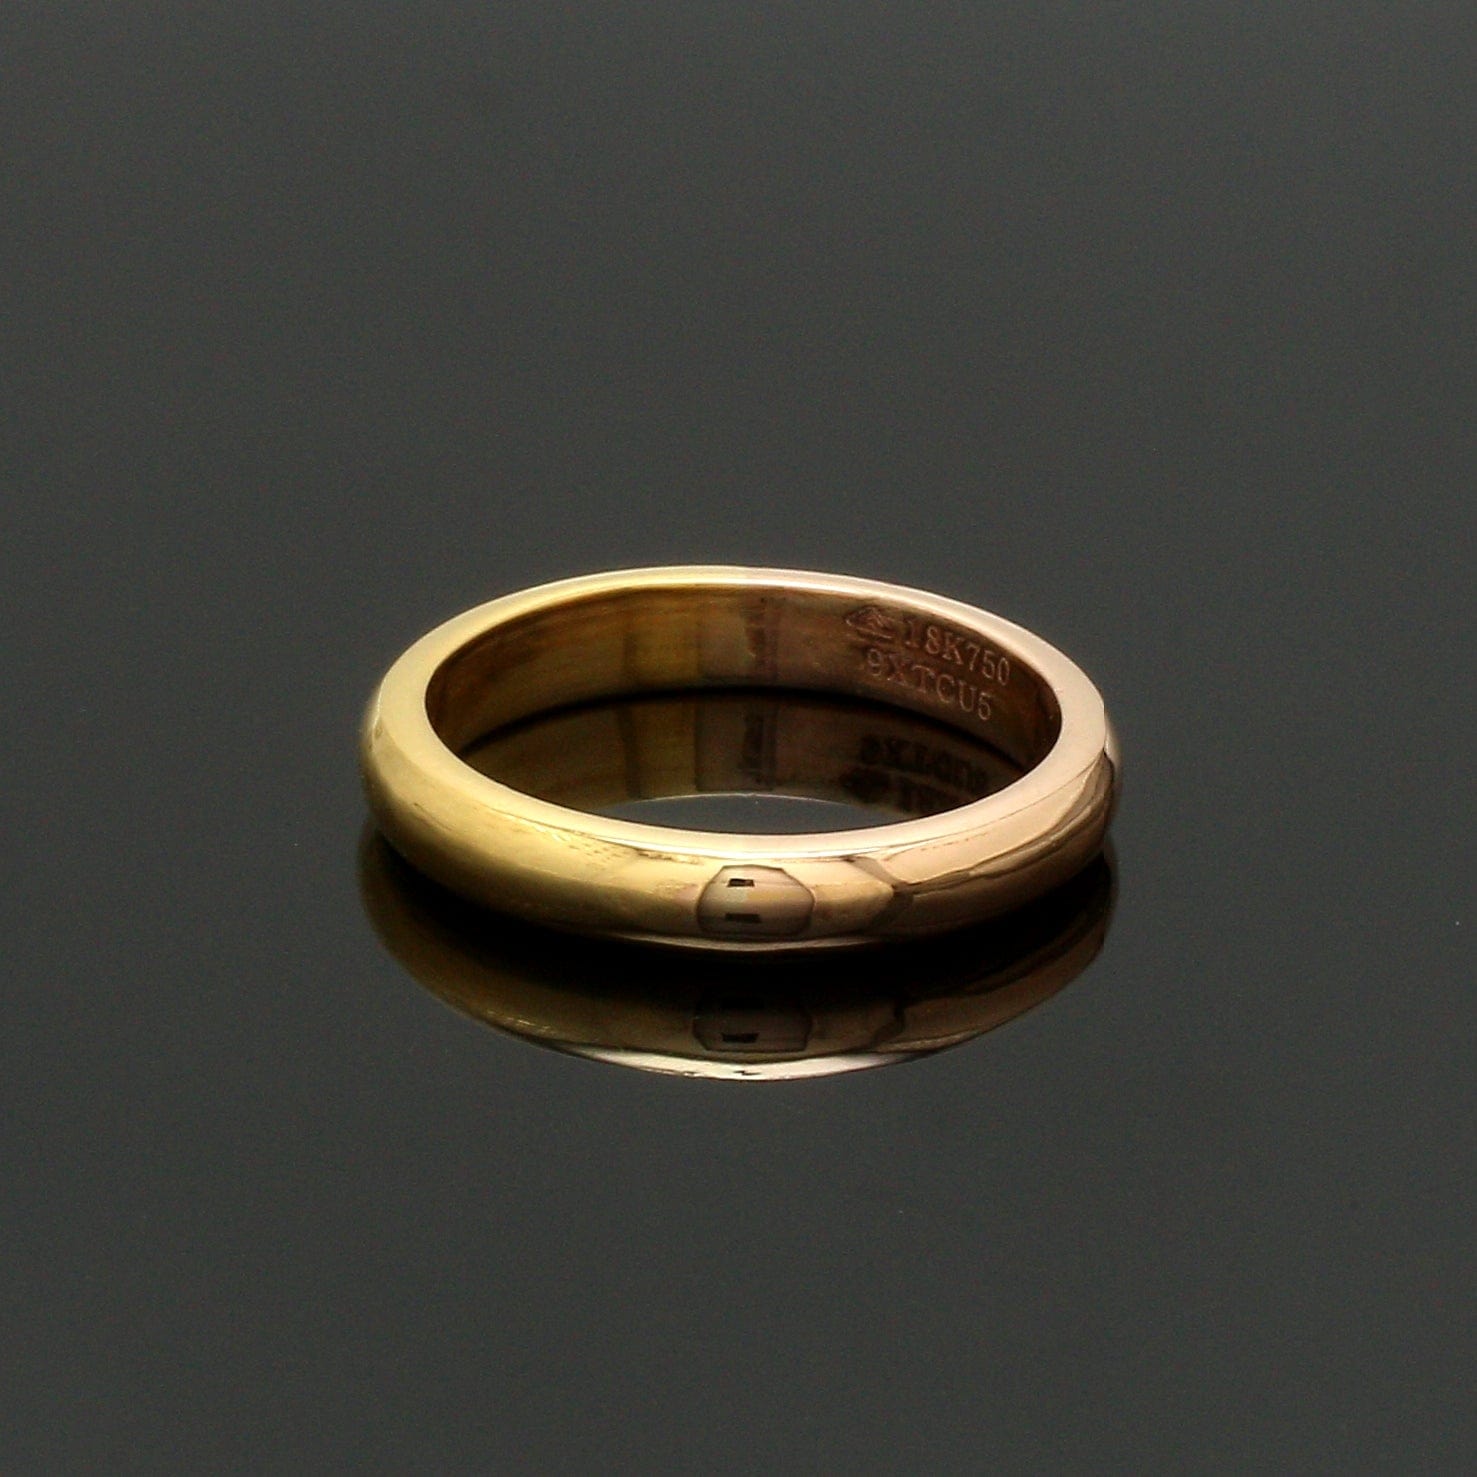 Buy quality 916 Gold Single Stone Couple Ring in Pune